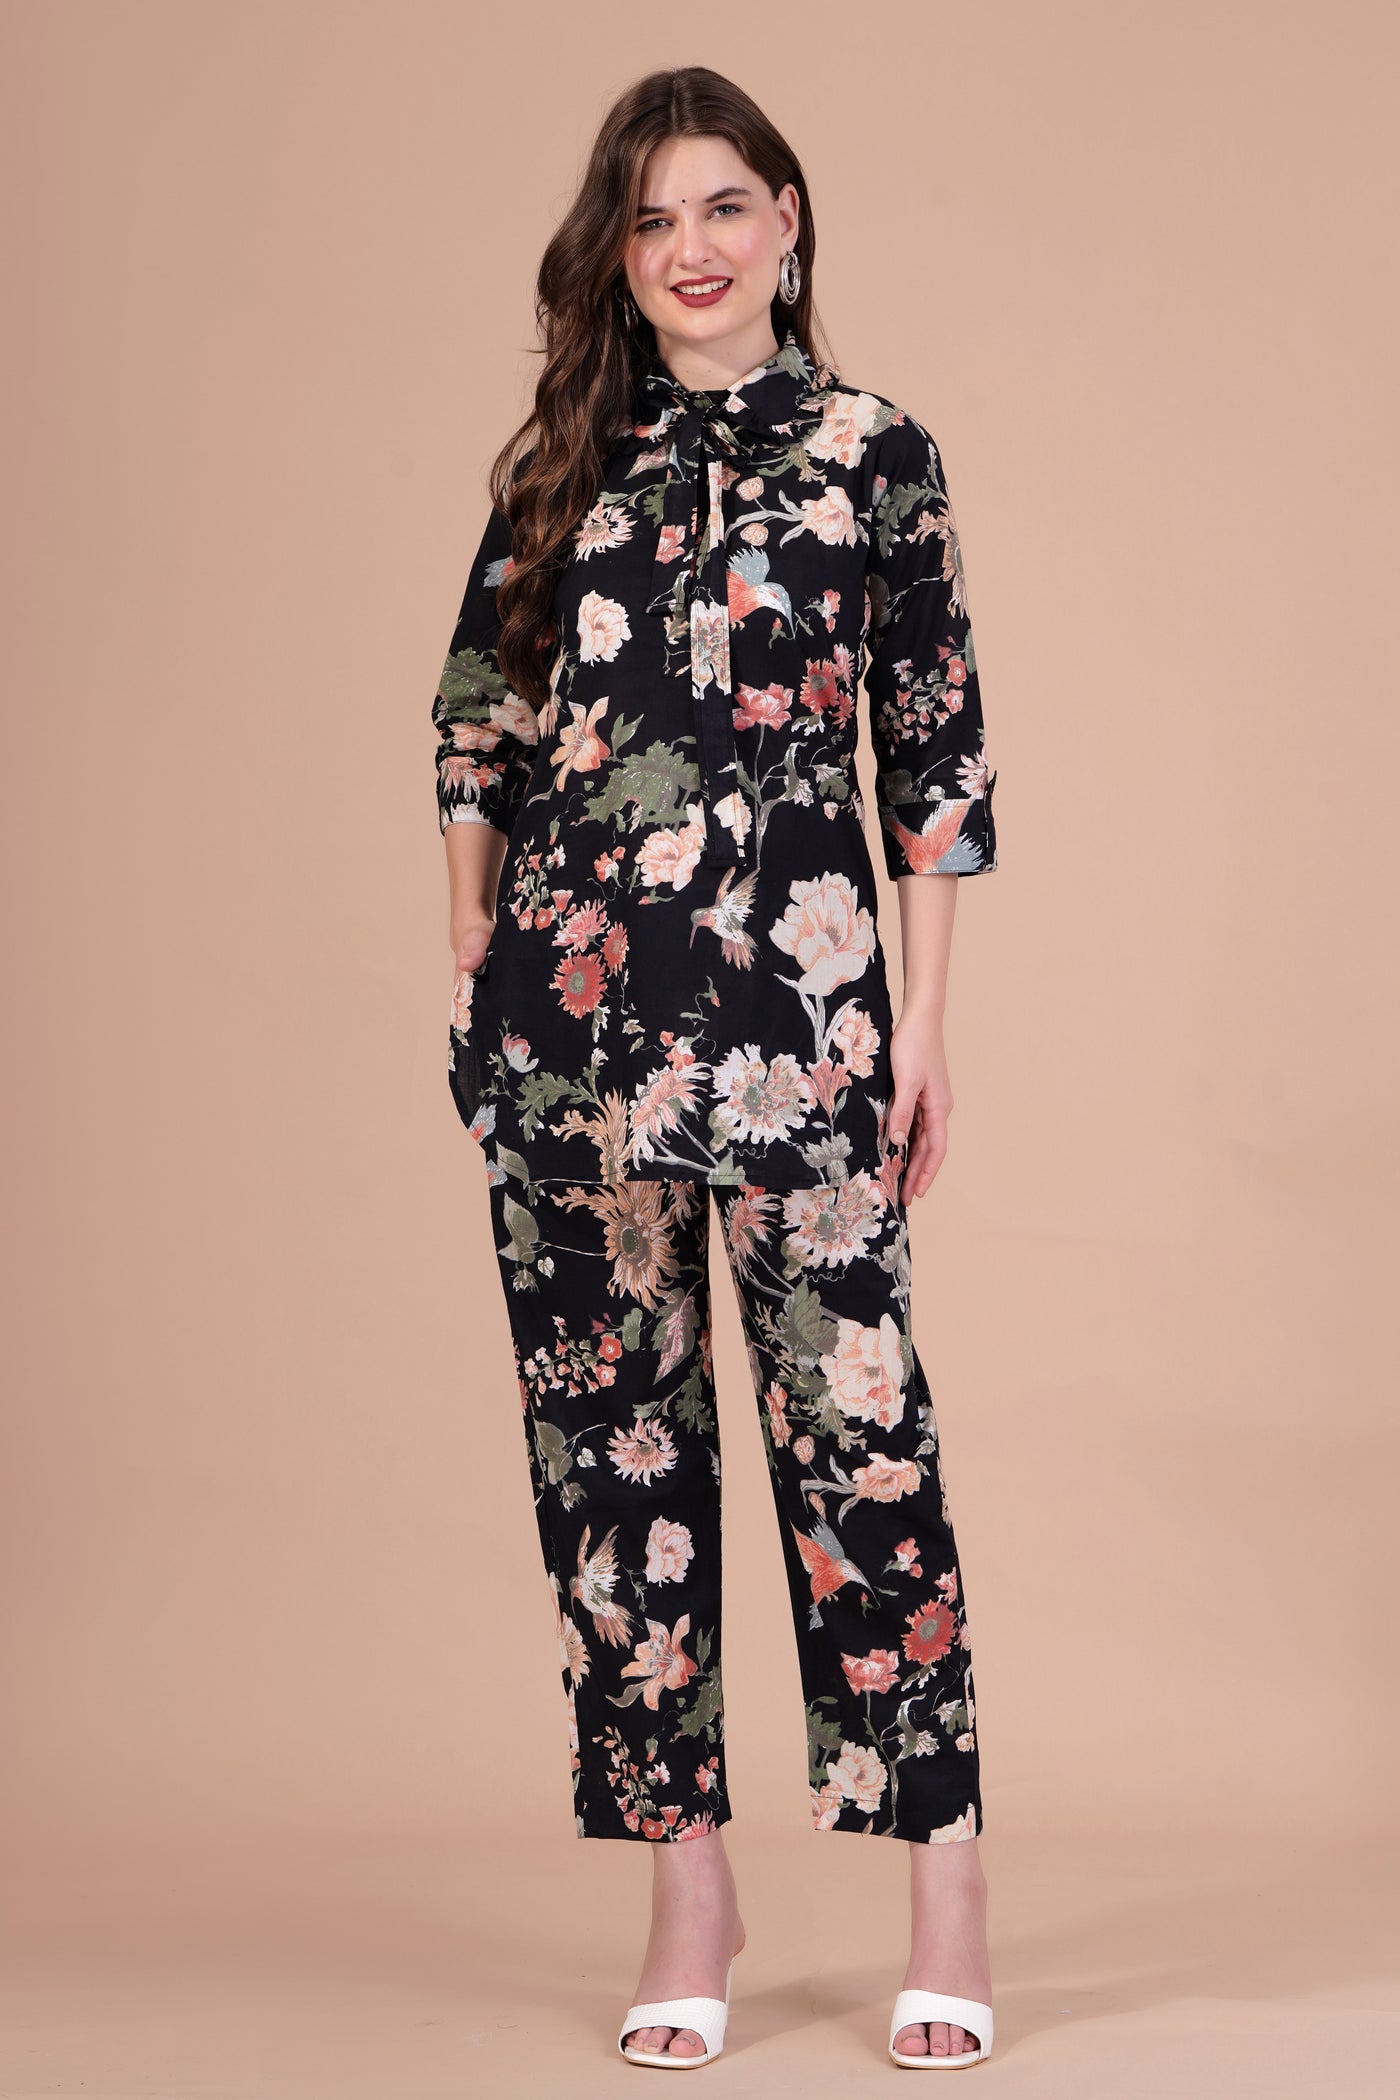 Zoya black flower printed cotton co-ord set with collar neck and belt